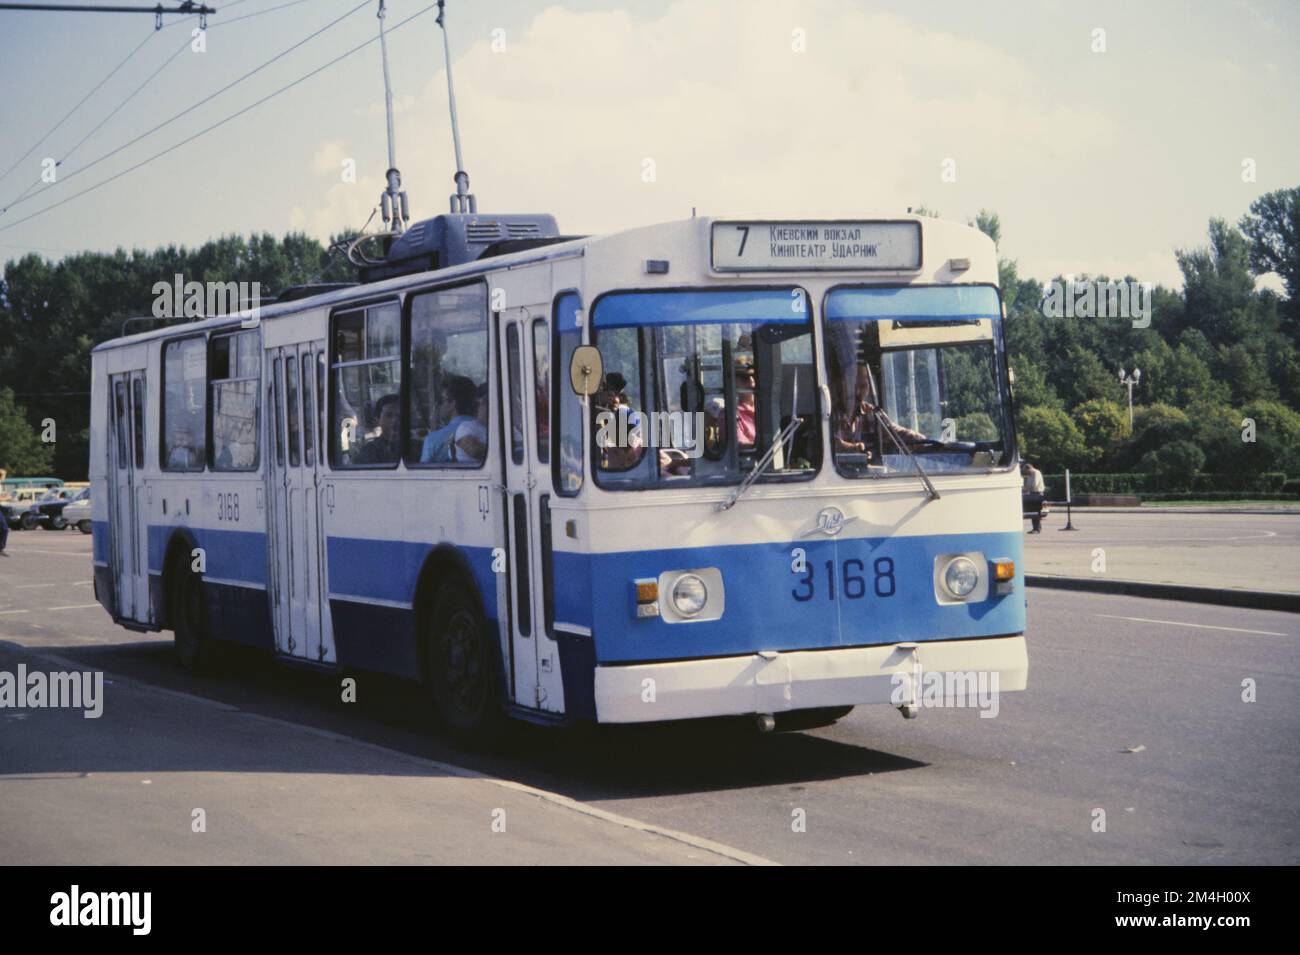 Historic Image Of A ZiU-682V Electric Trolley Manufactured By Trolza Bus Number 3168 With Passengers Used For Public Transport On Route 7 In The Soviet Union Moscow Russia 1990 Stock Photo